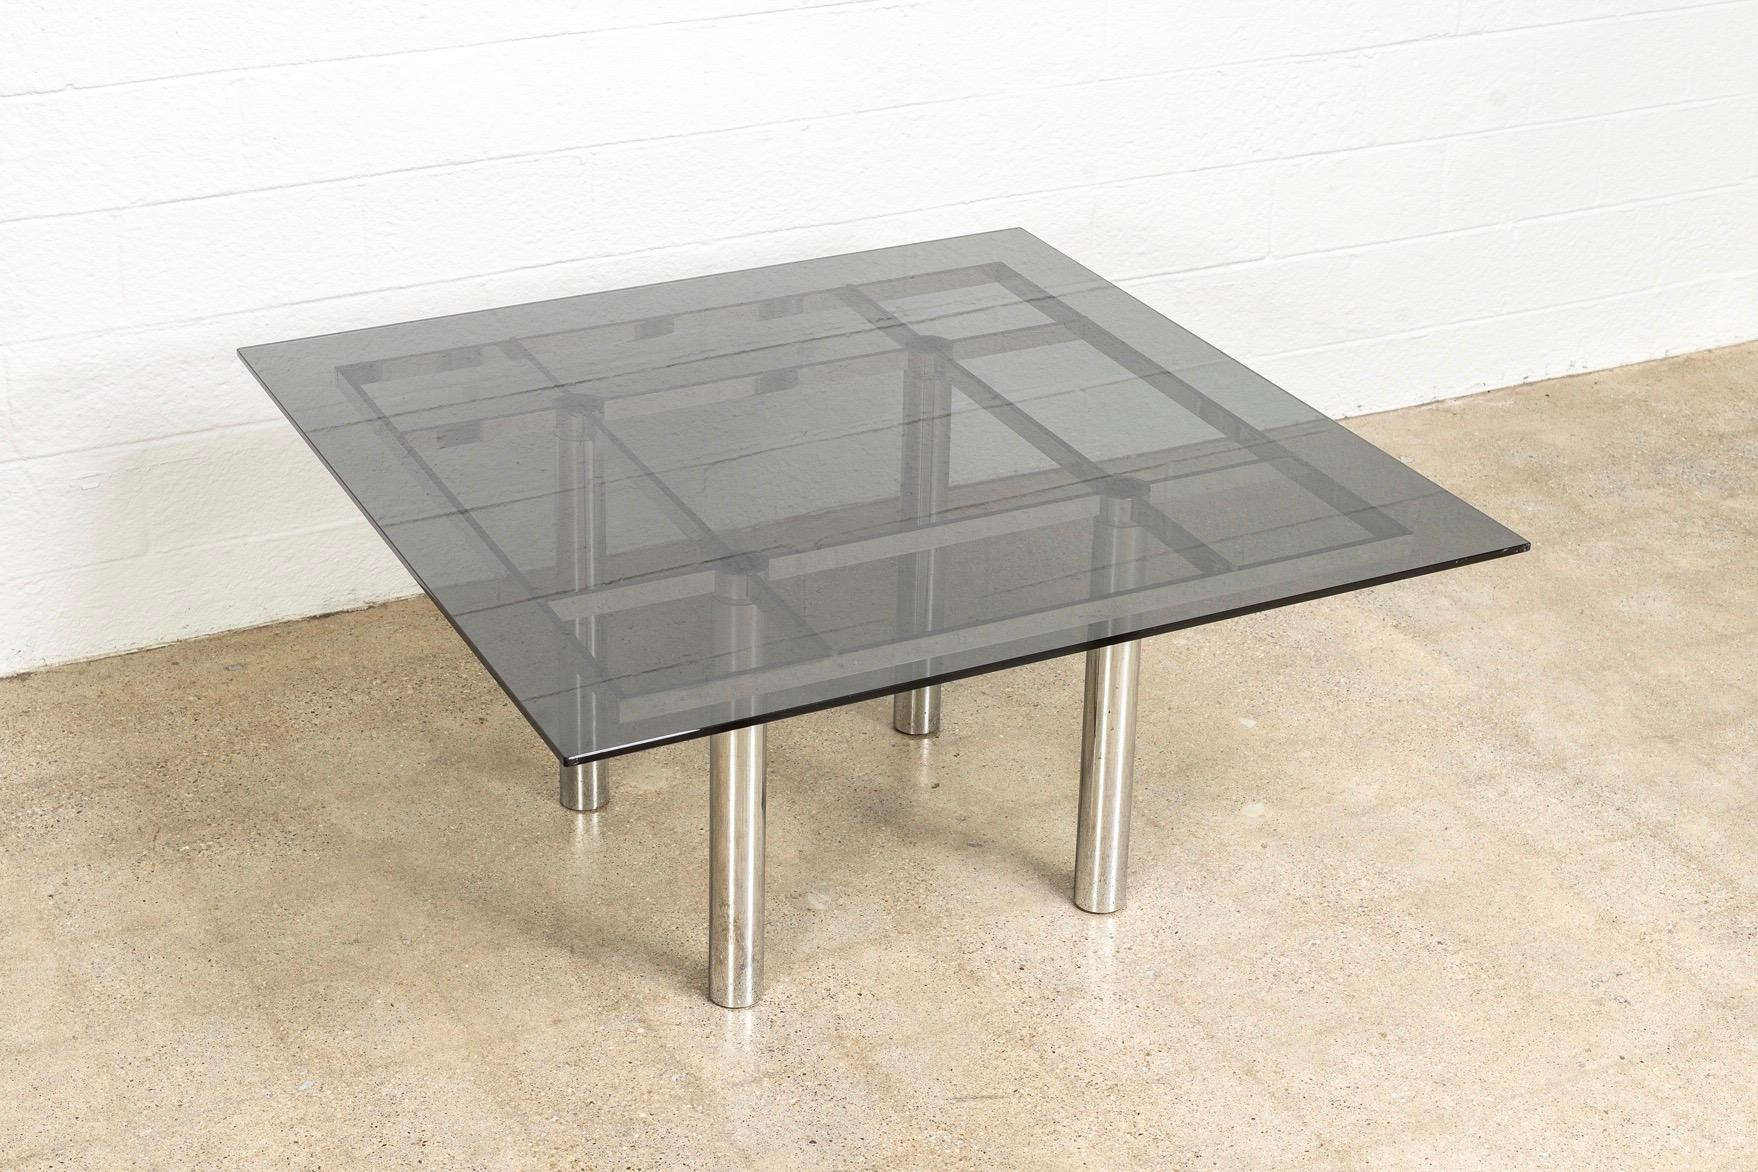 This midcentury modernist “Andre” square glass and chrome table designed by Tobia Scarpa for Knoll International is circa 1970. The table is heavy and solid and exceptionally crafted from premium materials. The sleek design has a clean Minimalist